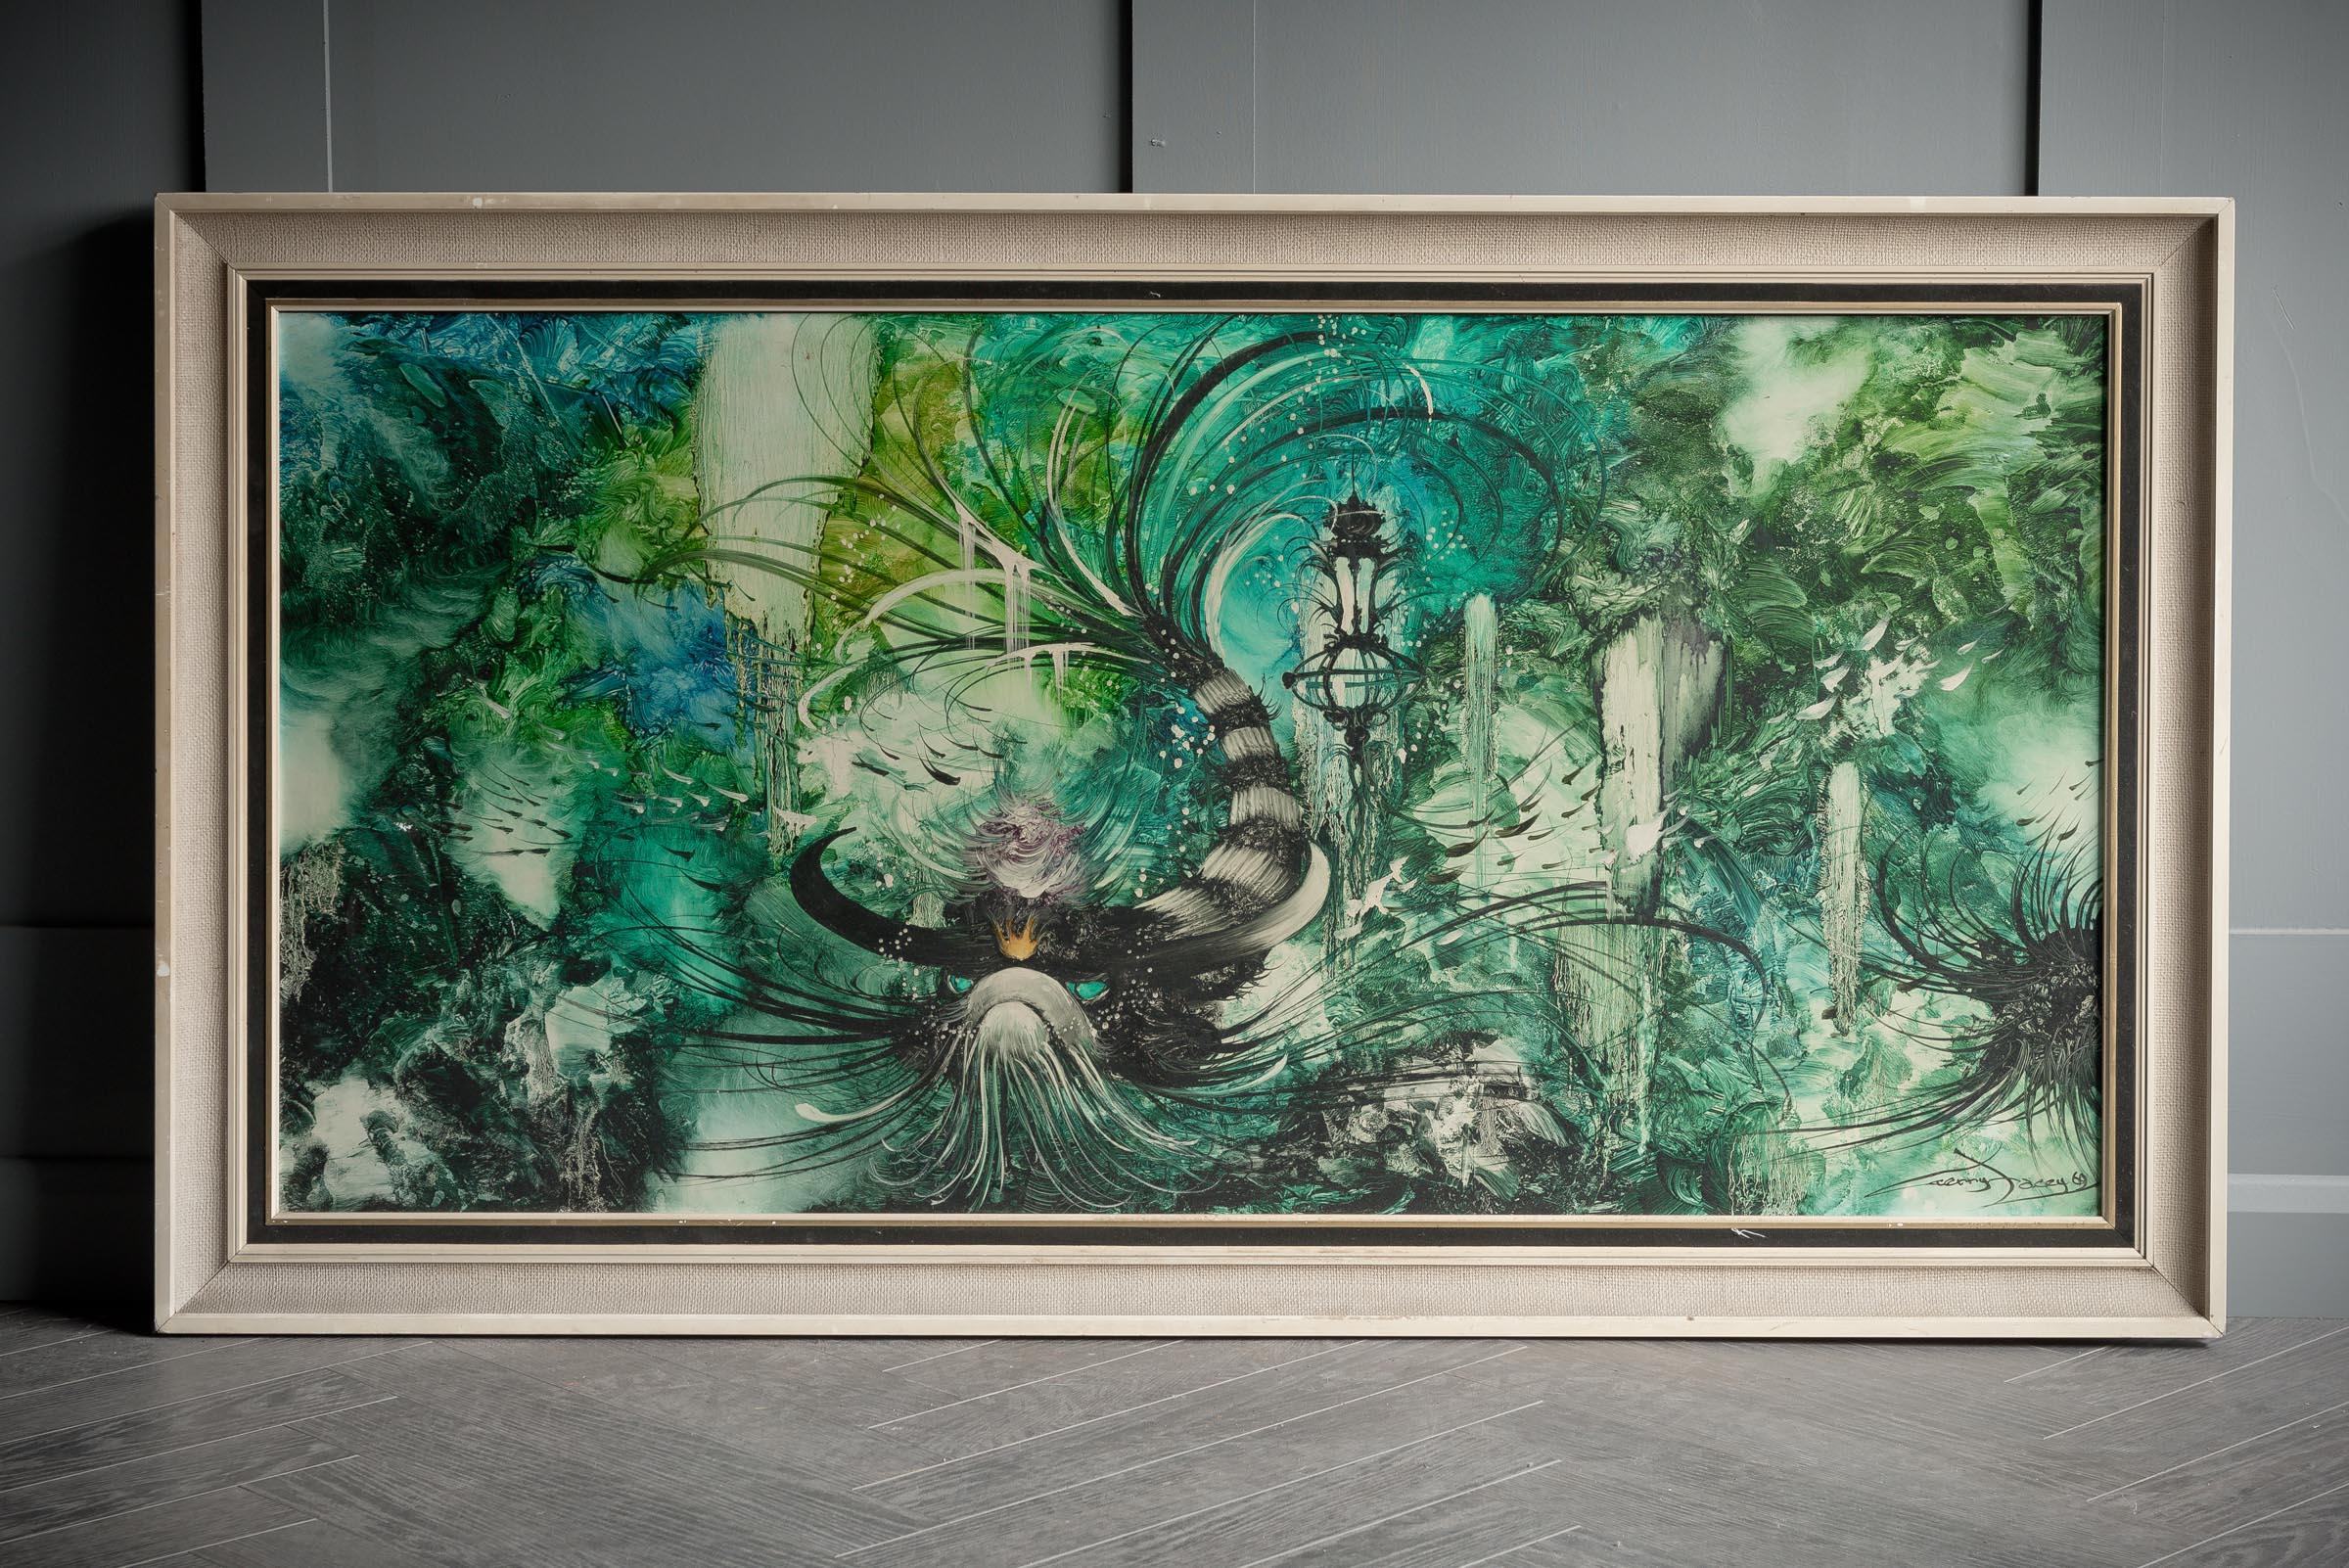 Gerry Facey is a Postwar & Contemporary artist. He was a famous science fiction artist for comics including Tales of Tomorrow and Worlds of Fantasy. This abstract painting depicts a fish in various hues of green. The painting is signed and dated